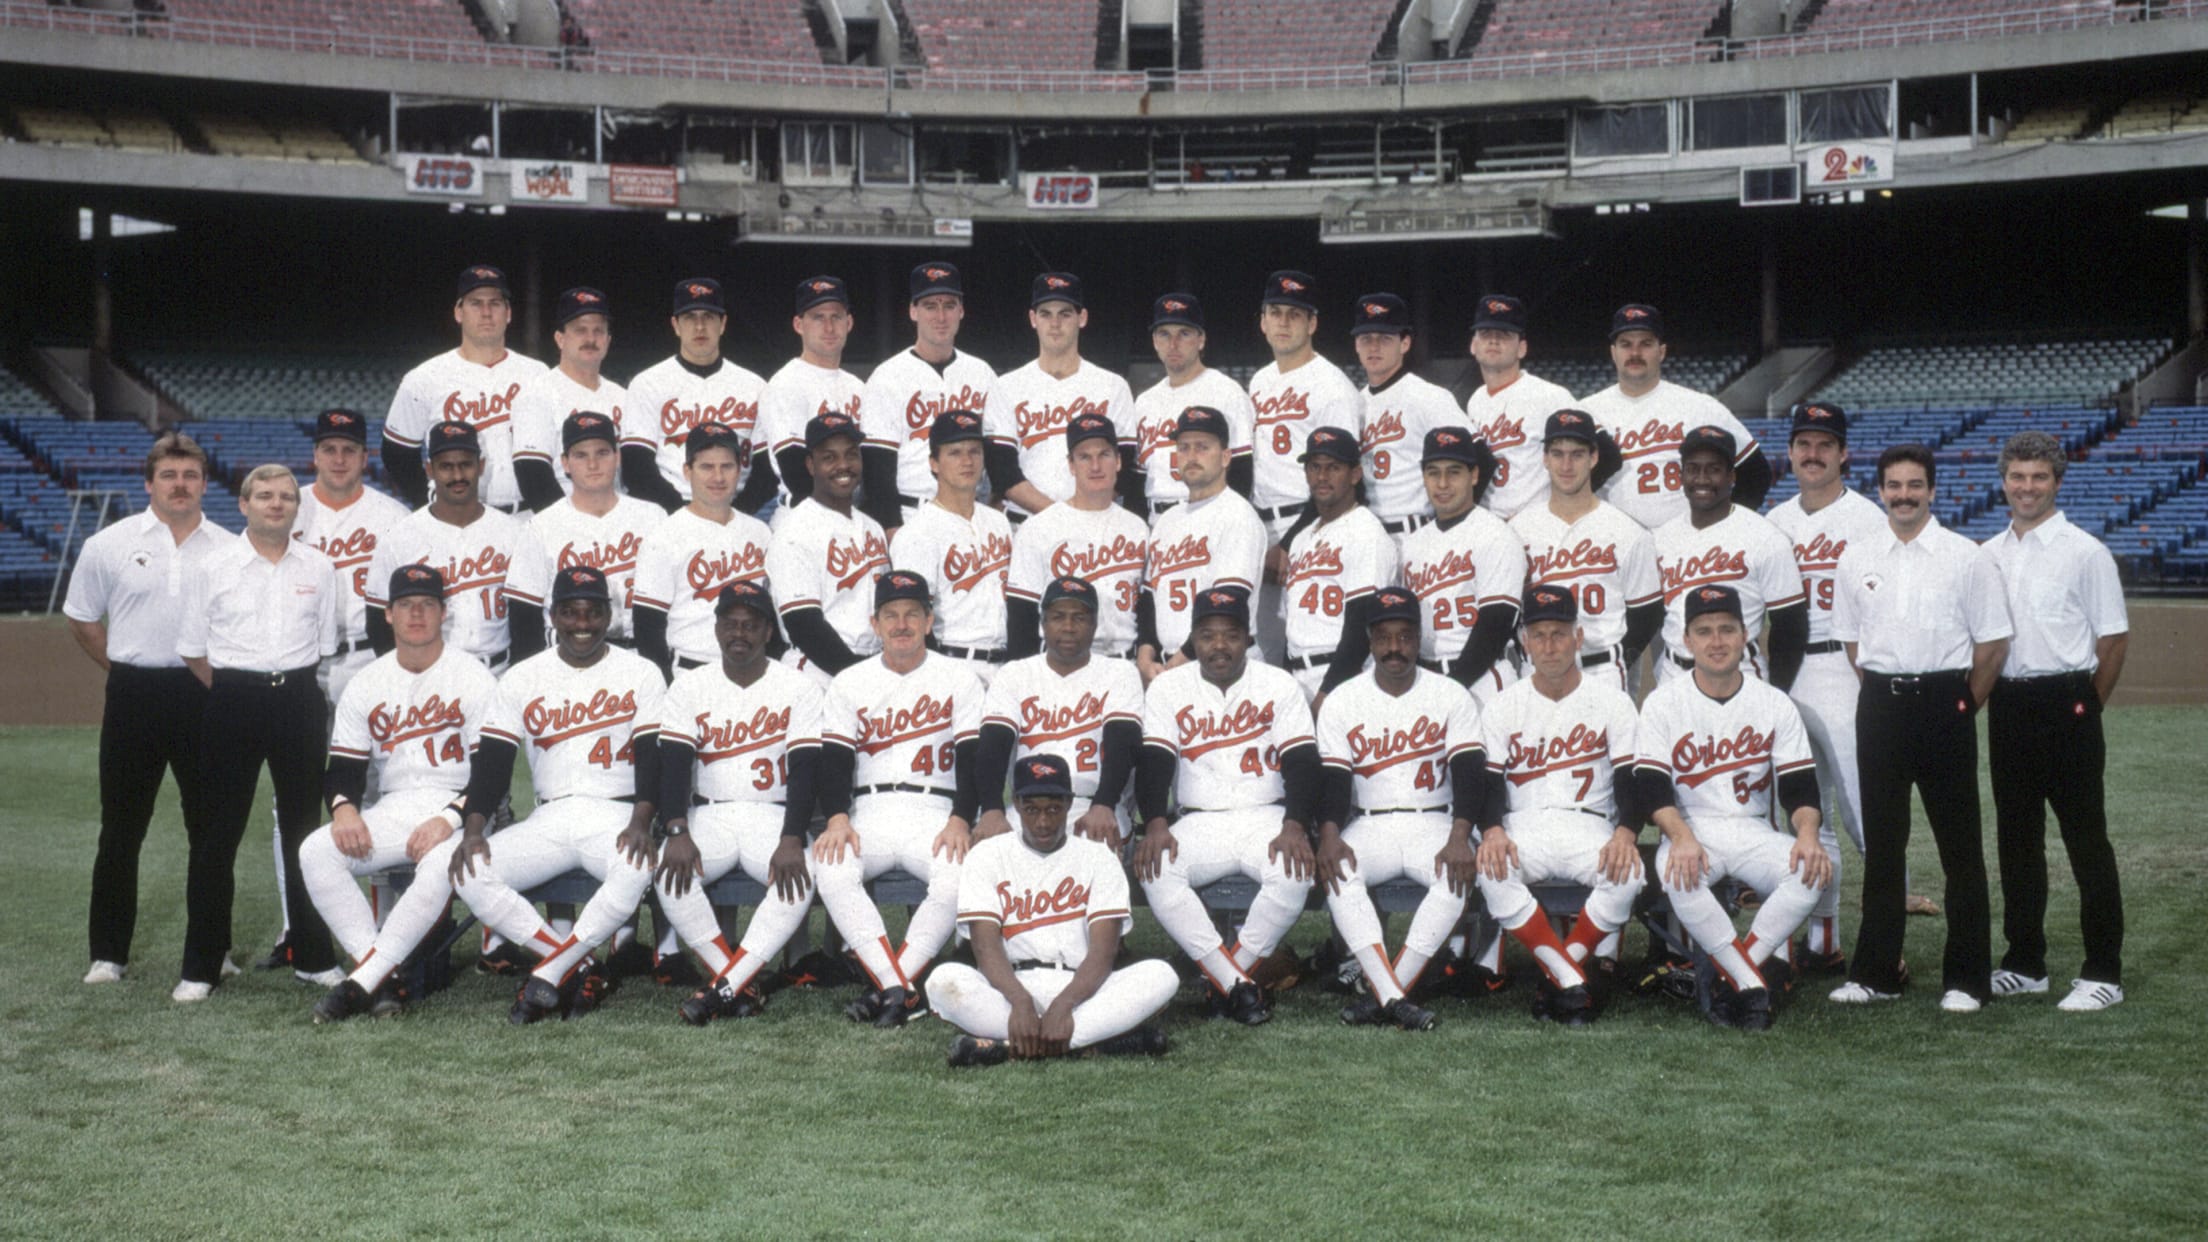 Astros: Revisiting the 1987 MLB amateur draft hits, misses